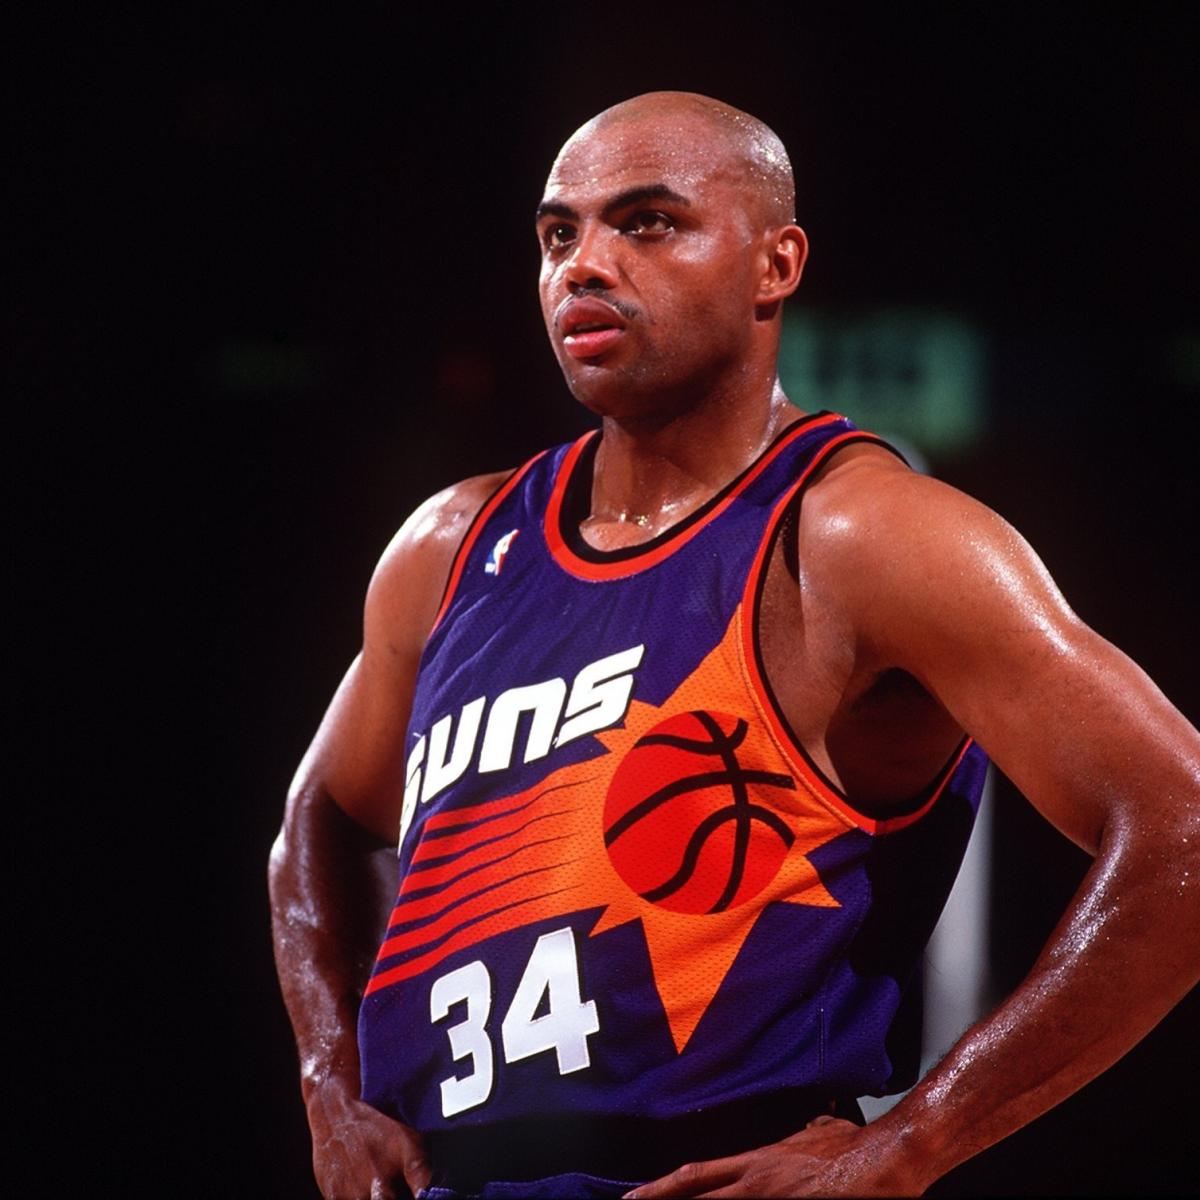 NBA on ESPN - The Phoenix Suns are rocking the throwbacks